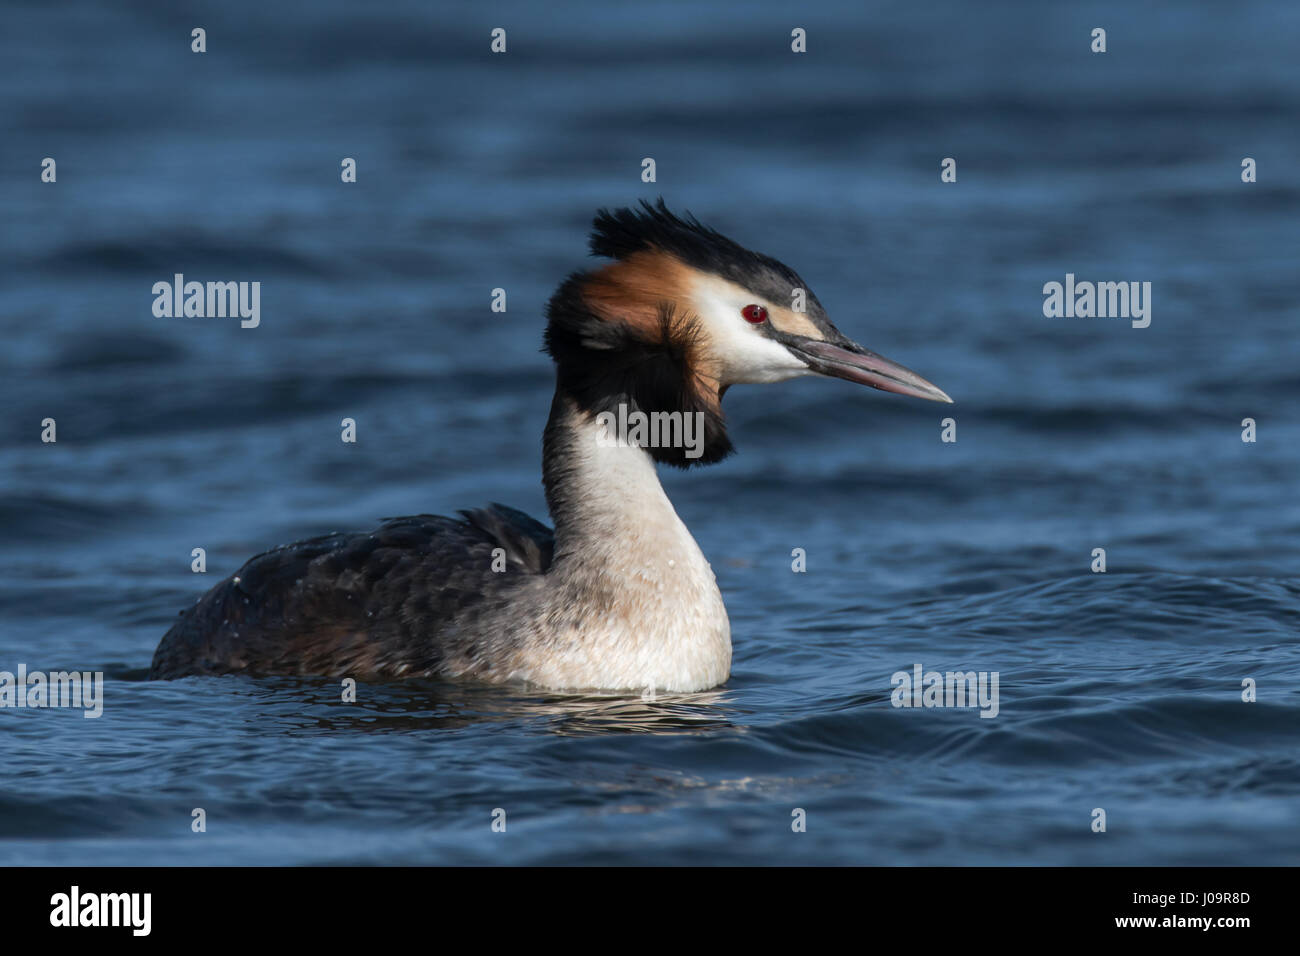 Great crested grebe (Podiceps cristatus) with feathers blowing. Elegant waterbird in family Podicipedidae swimming on lake at Cardiff Bay, Wales, UK Stock Photo